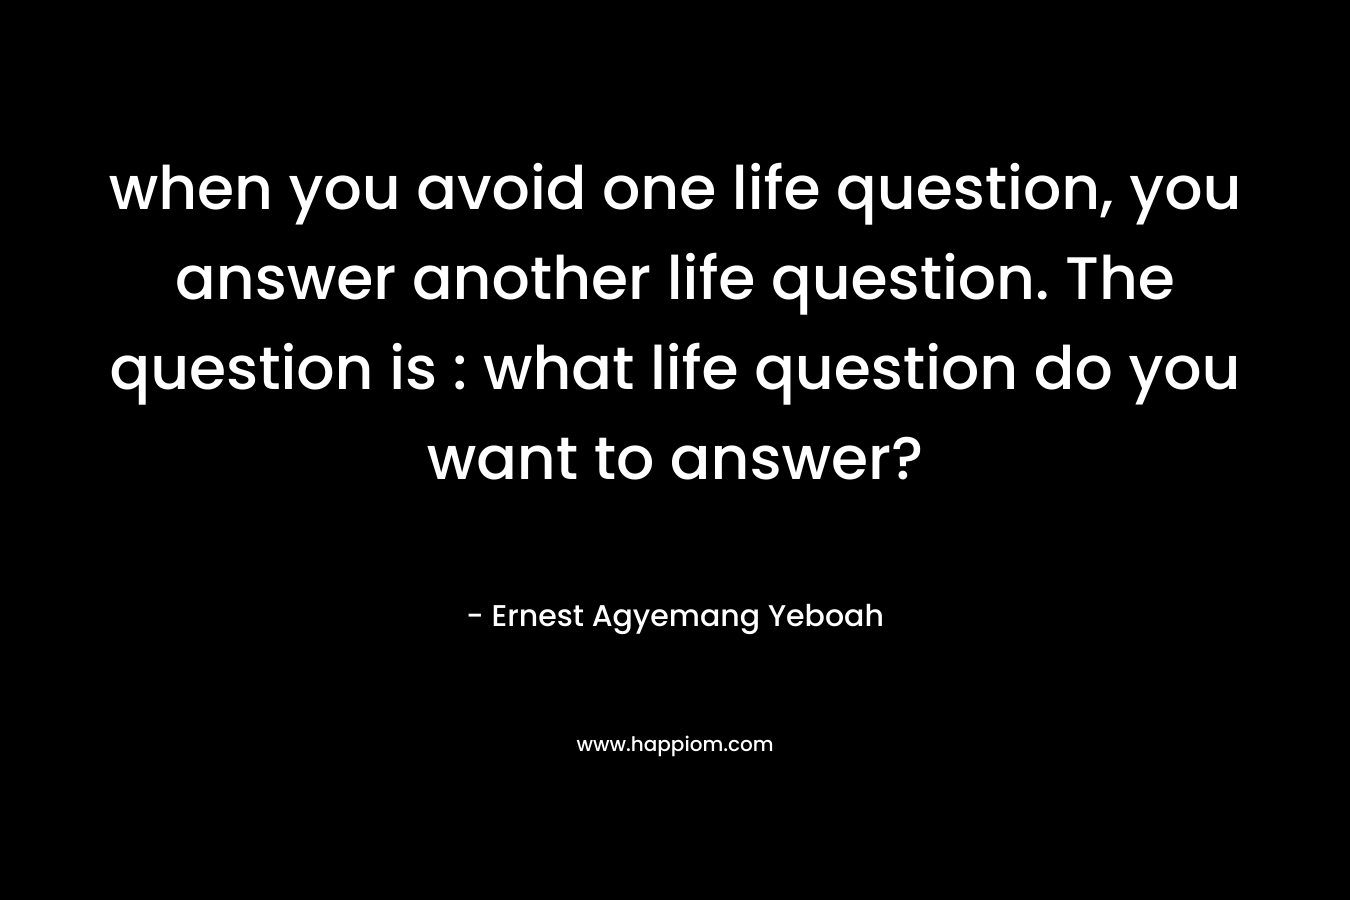 when you avoid one life question, you answer another life question. The question is : what life question do you want to answer?